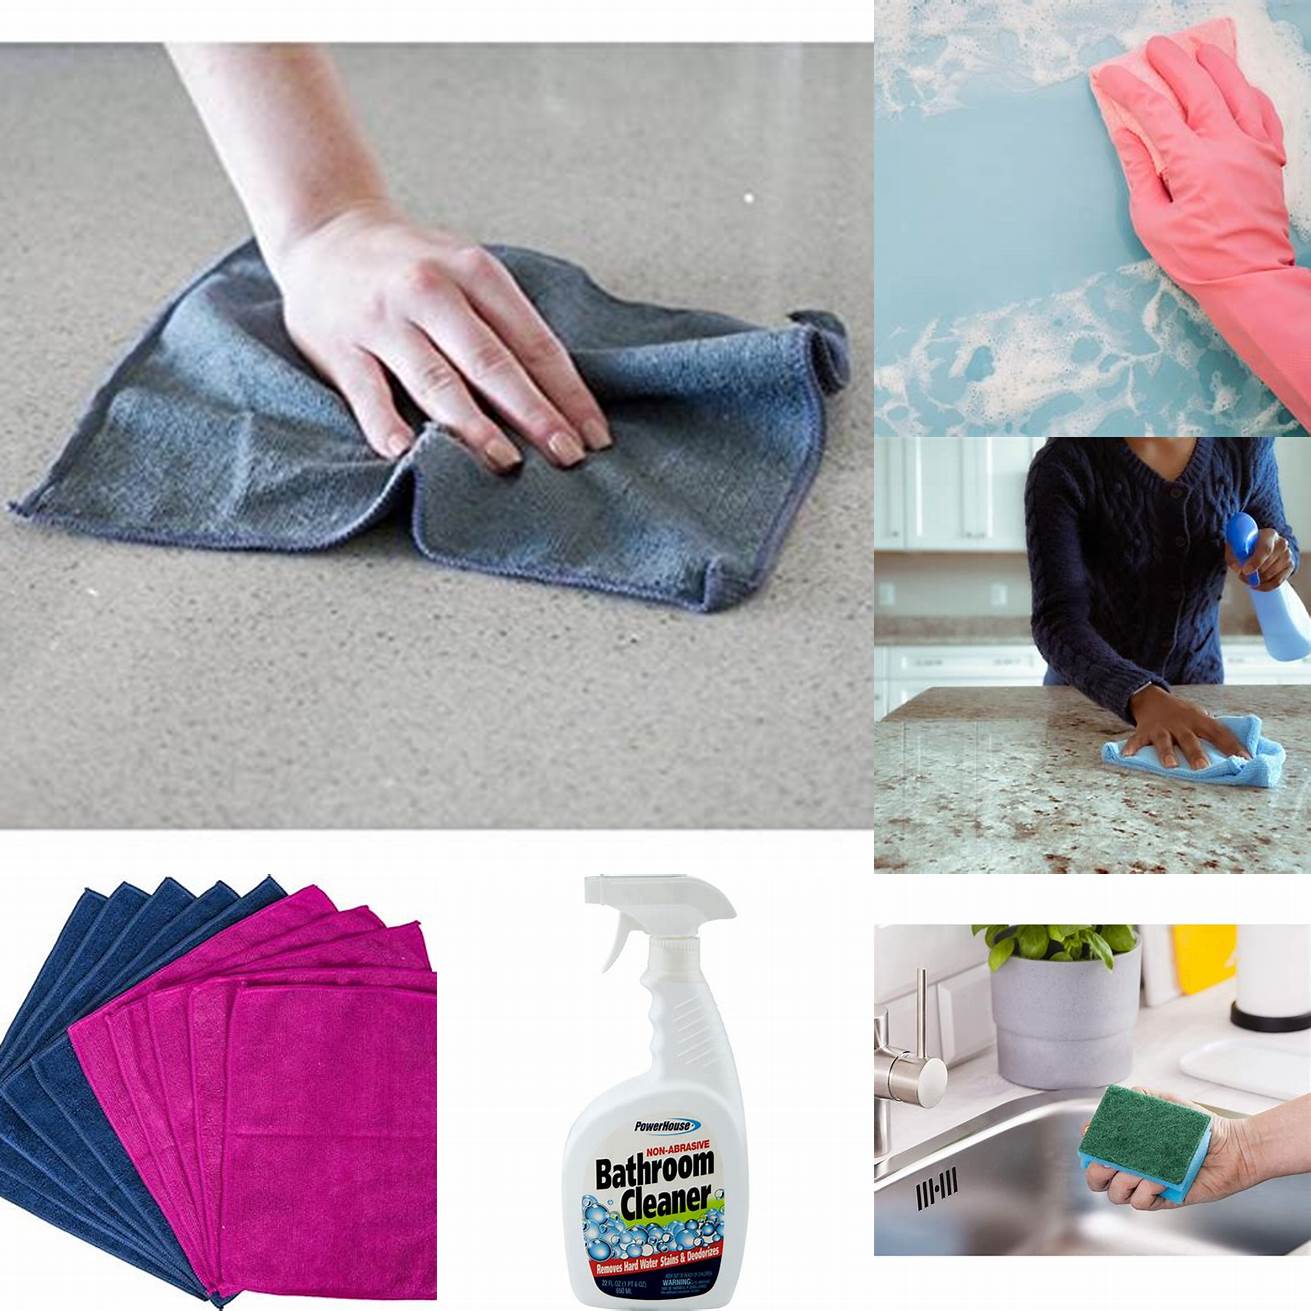 Use a non-abrasive cleaner and a soft cloth to clean the countertop